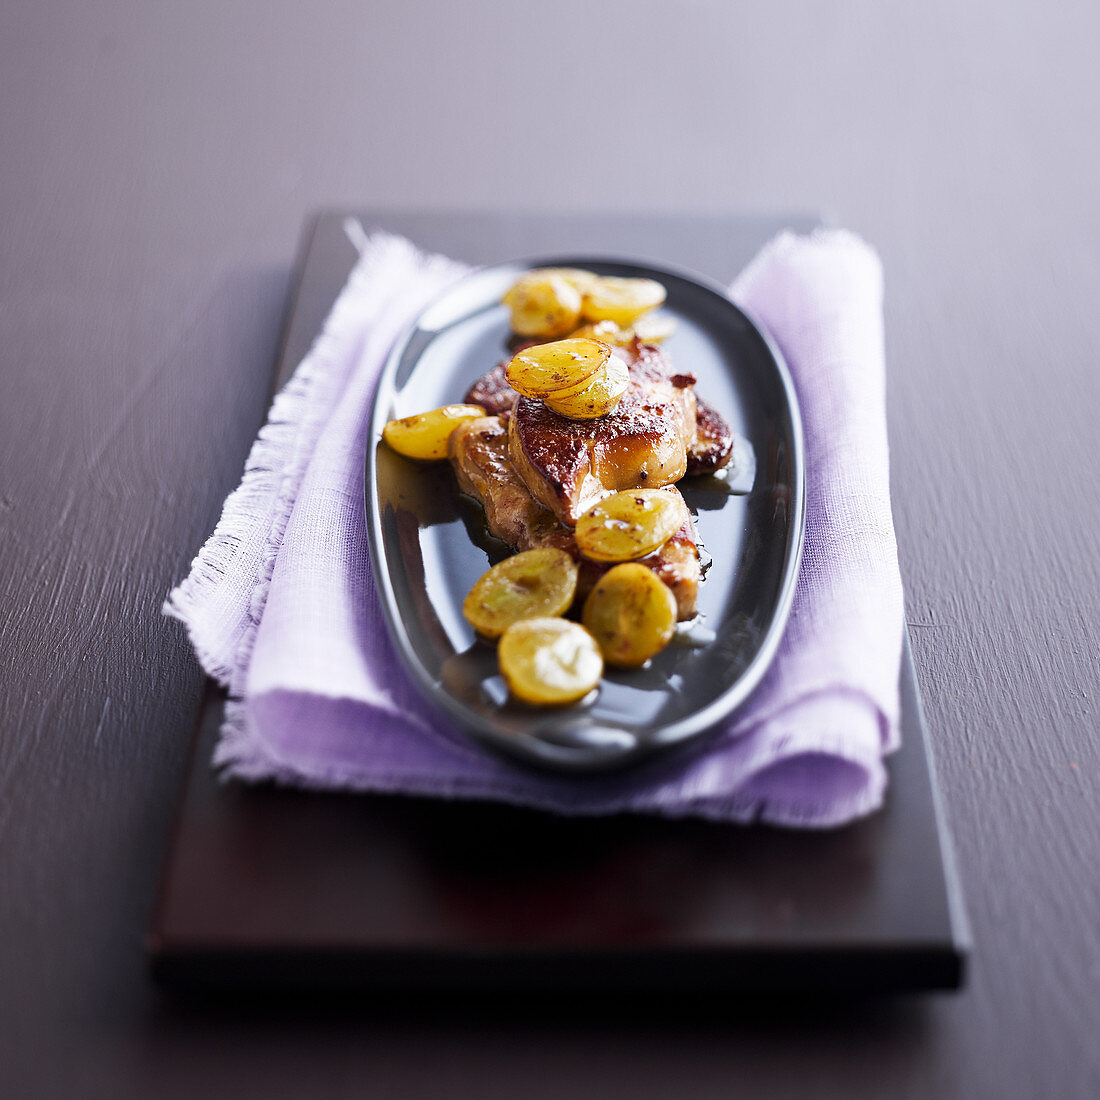 Pan-fried foie gras with cider and white grapes